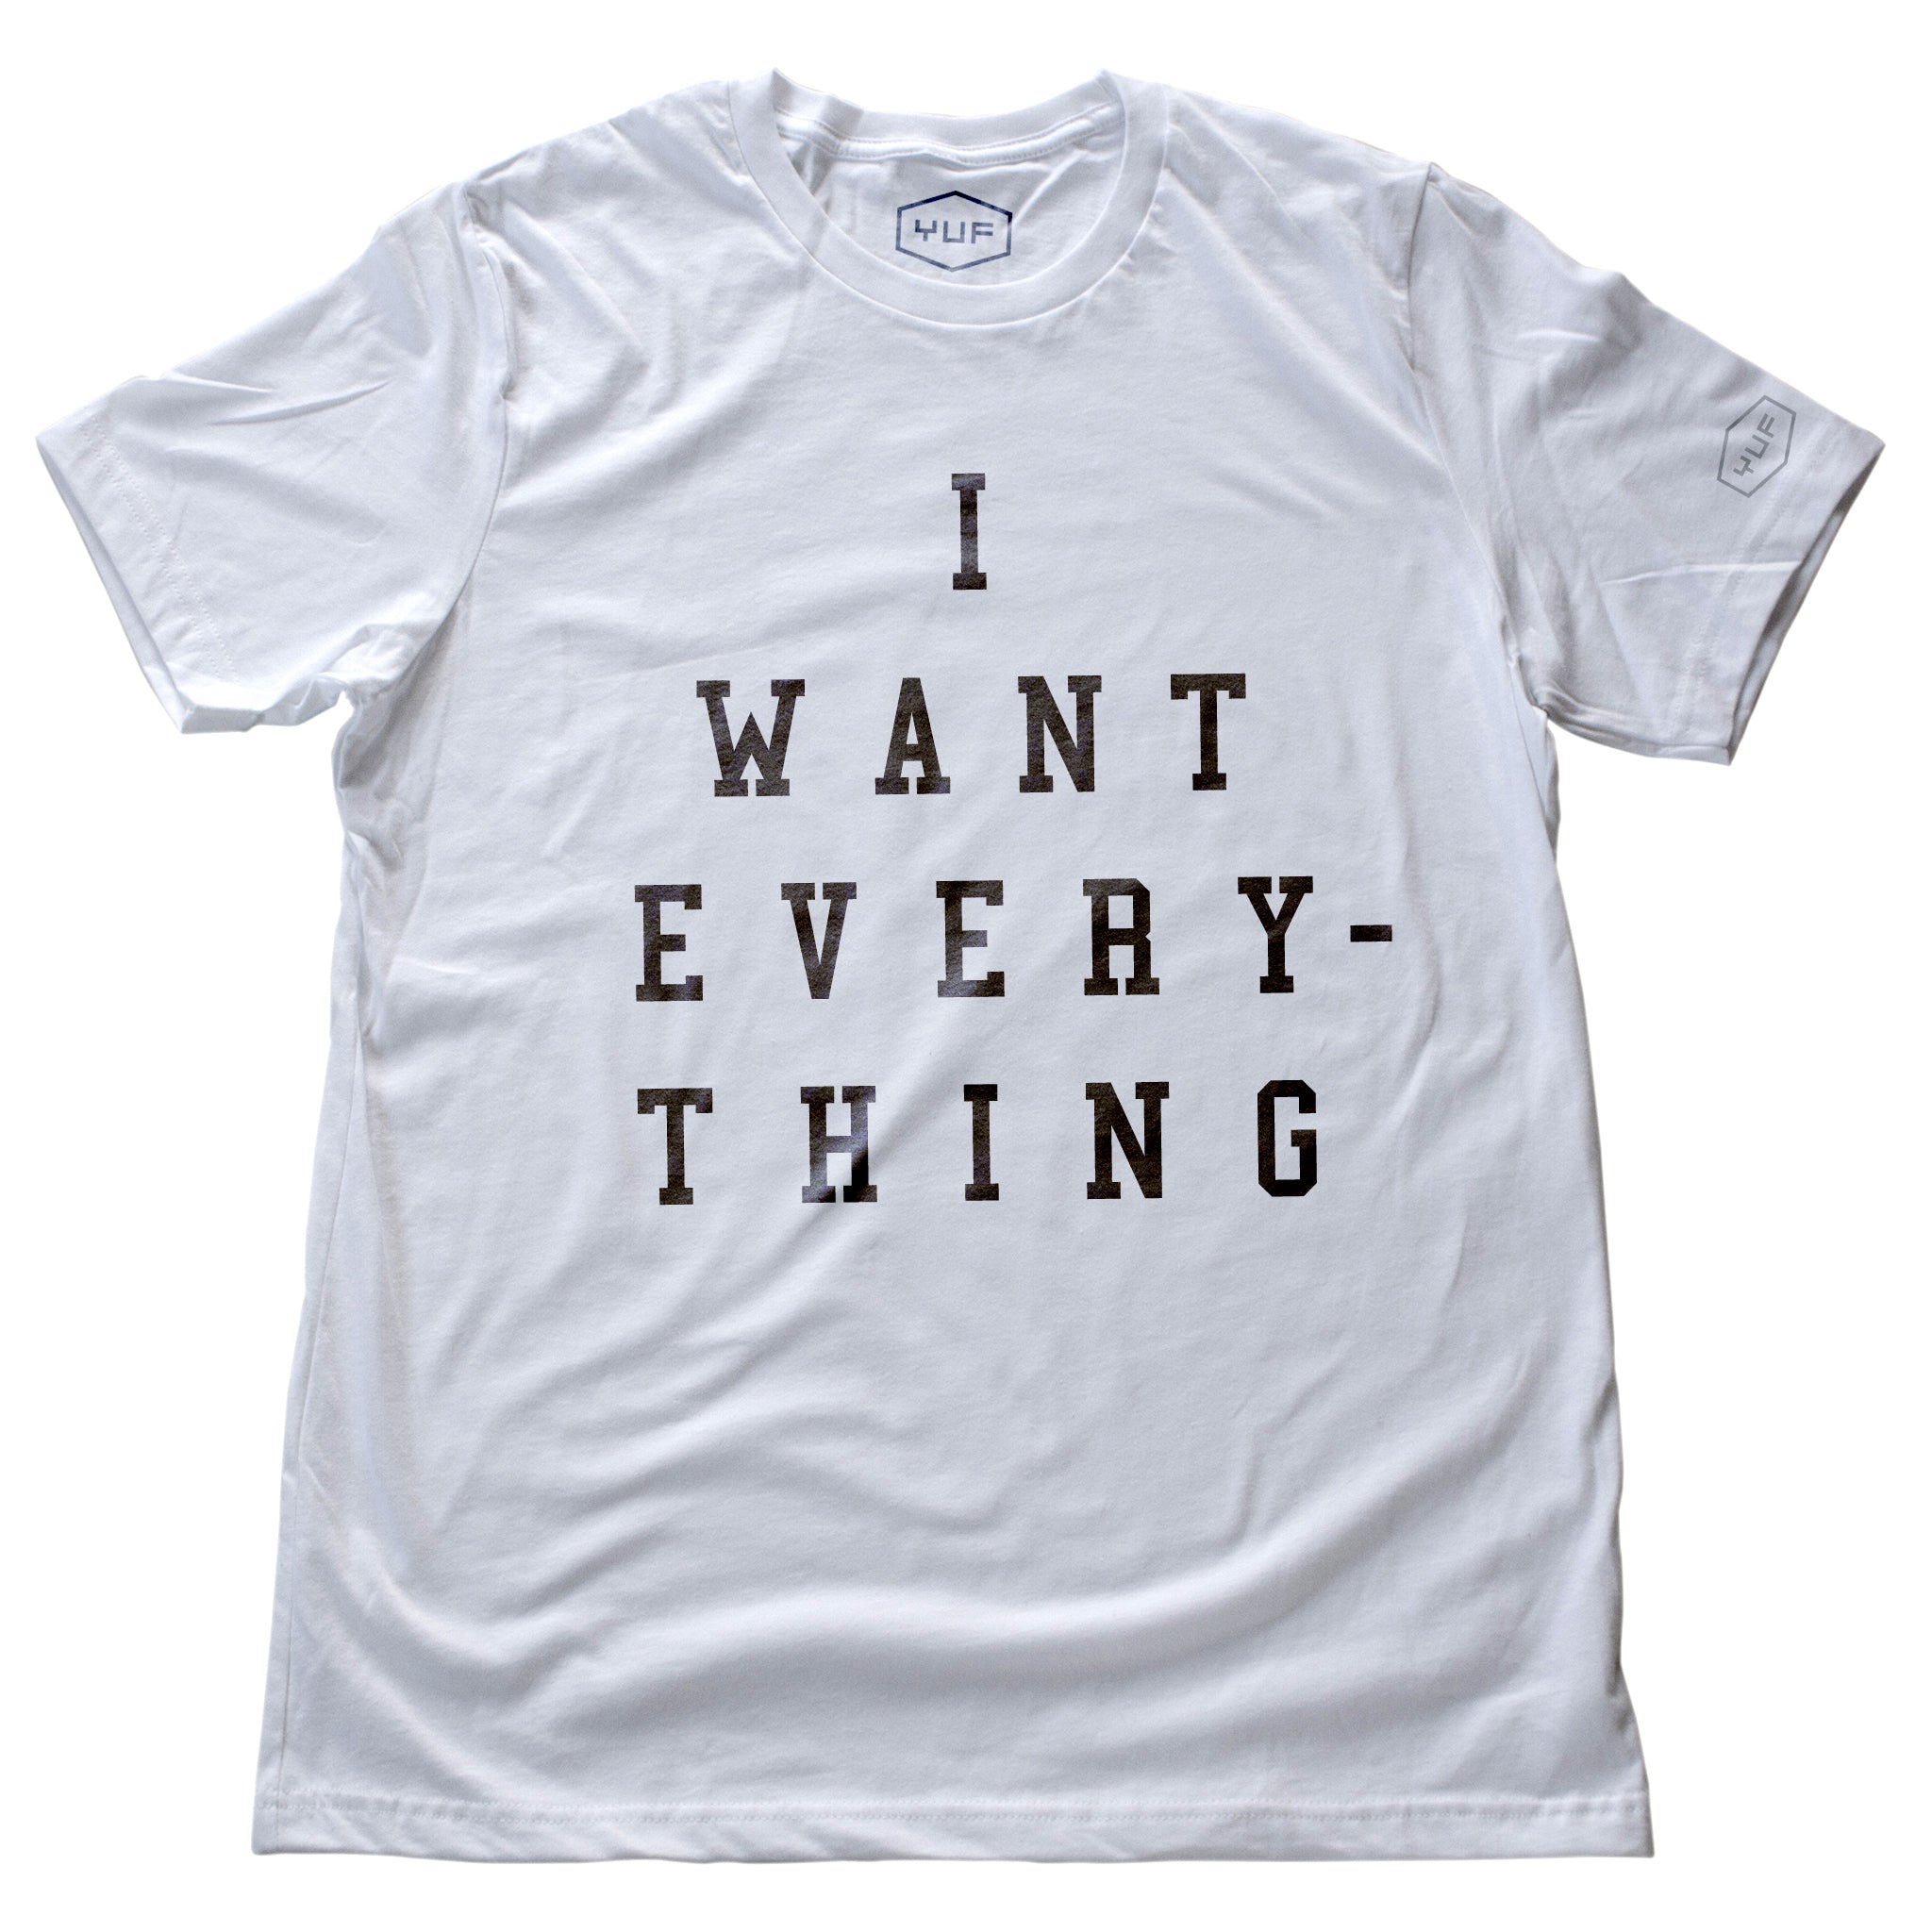 A simple, elegant, sarcastic retro graphic t-shirt in white, with bold typography that reads “I WANT EVERYTHING.” By fashion brand YUF, from wolfsaint.net